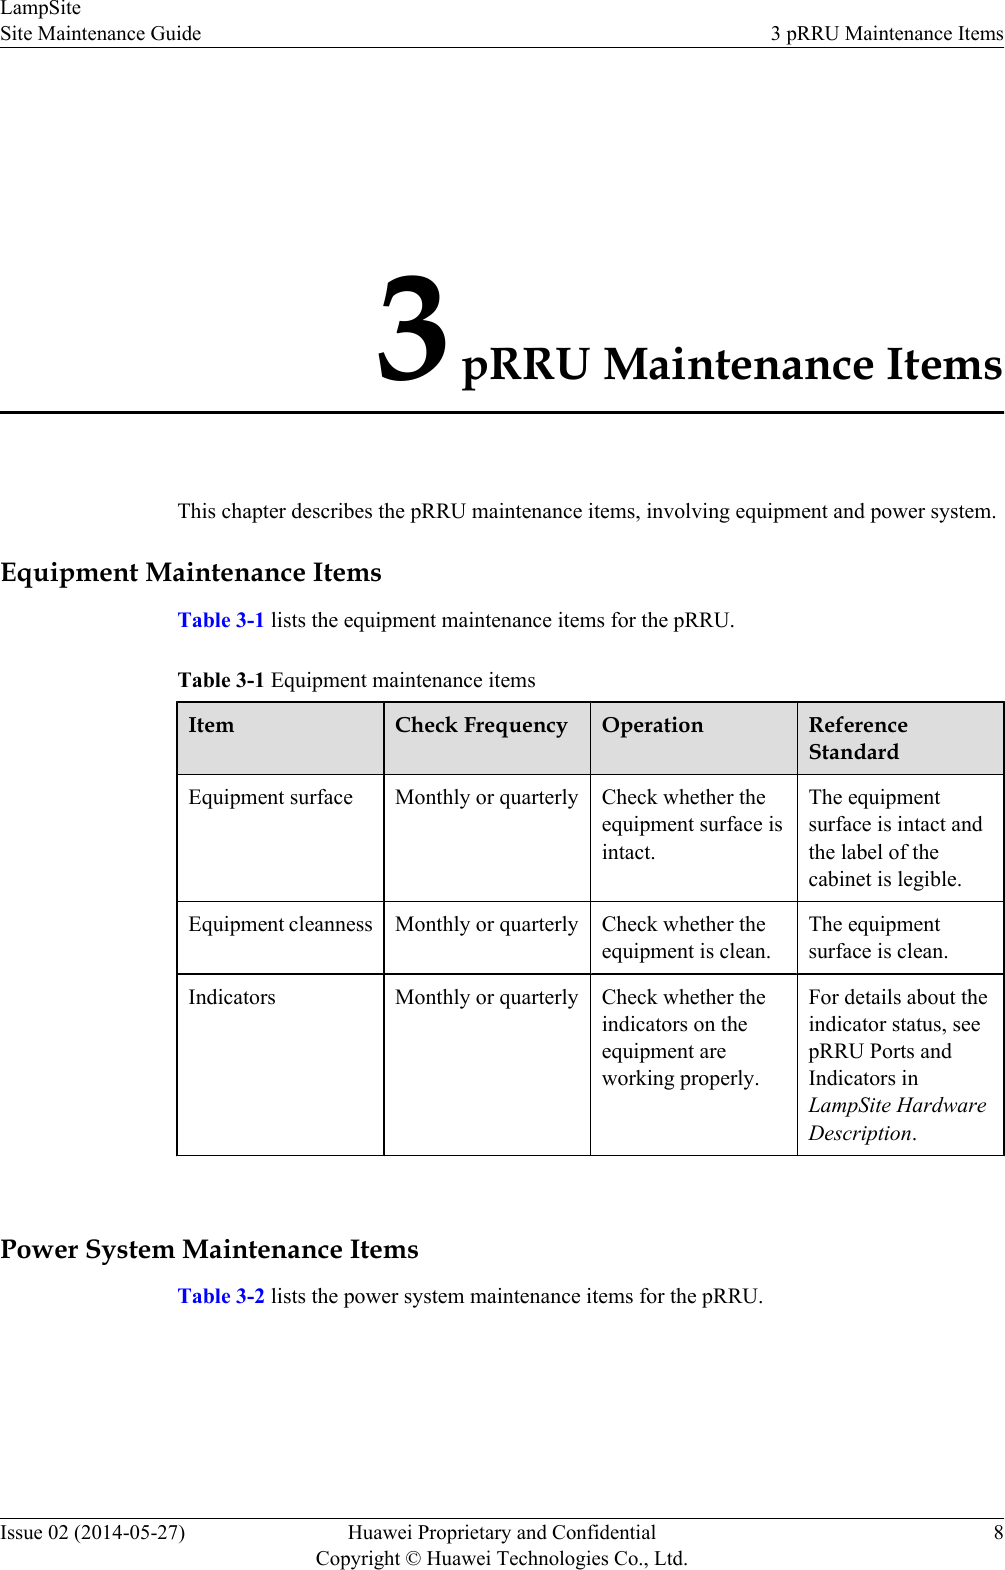 3 pRRU Maintenance ItemsThis chapter describes the pRRU maintenance items, involving equipment and power system.Equipment Maintenance ItemsTable 3-1 lists the equipment maintenance items for the pRRU.Table 3-1 Equipment maintenance itemsItem Check Frequency Operation ReferenceStandardEquipment surface Monthly or quarterly Check whether theequipment surface isintact.The equipmentsurface is intact andthe label of thecabinet is legible.Equipment cleanness Monthly or quarterly Check whether theequipment is clean.The equipmentsurface is clean.Indicators Monthly or quarterly Check whether theindicators on theequipment areworking properly.For details about theindicator status, seepRRU Ports andIndicators inLampSite HardwareDescription. Power System Maintenance ItemsTable 3-2 lists the power system maintenance items for the pRRU.LampSiteSite Maintenance Guide 3 pRRU Maintenance ItemsIssue 02 (2014-05-27) Huawei Proprietary and ConfidentialCopyright © Huawei Technologies Co., Ltd.8